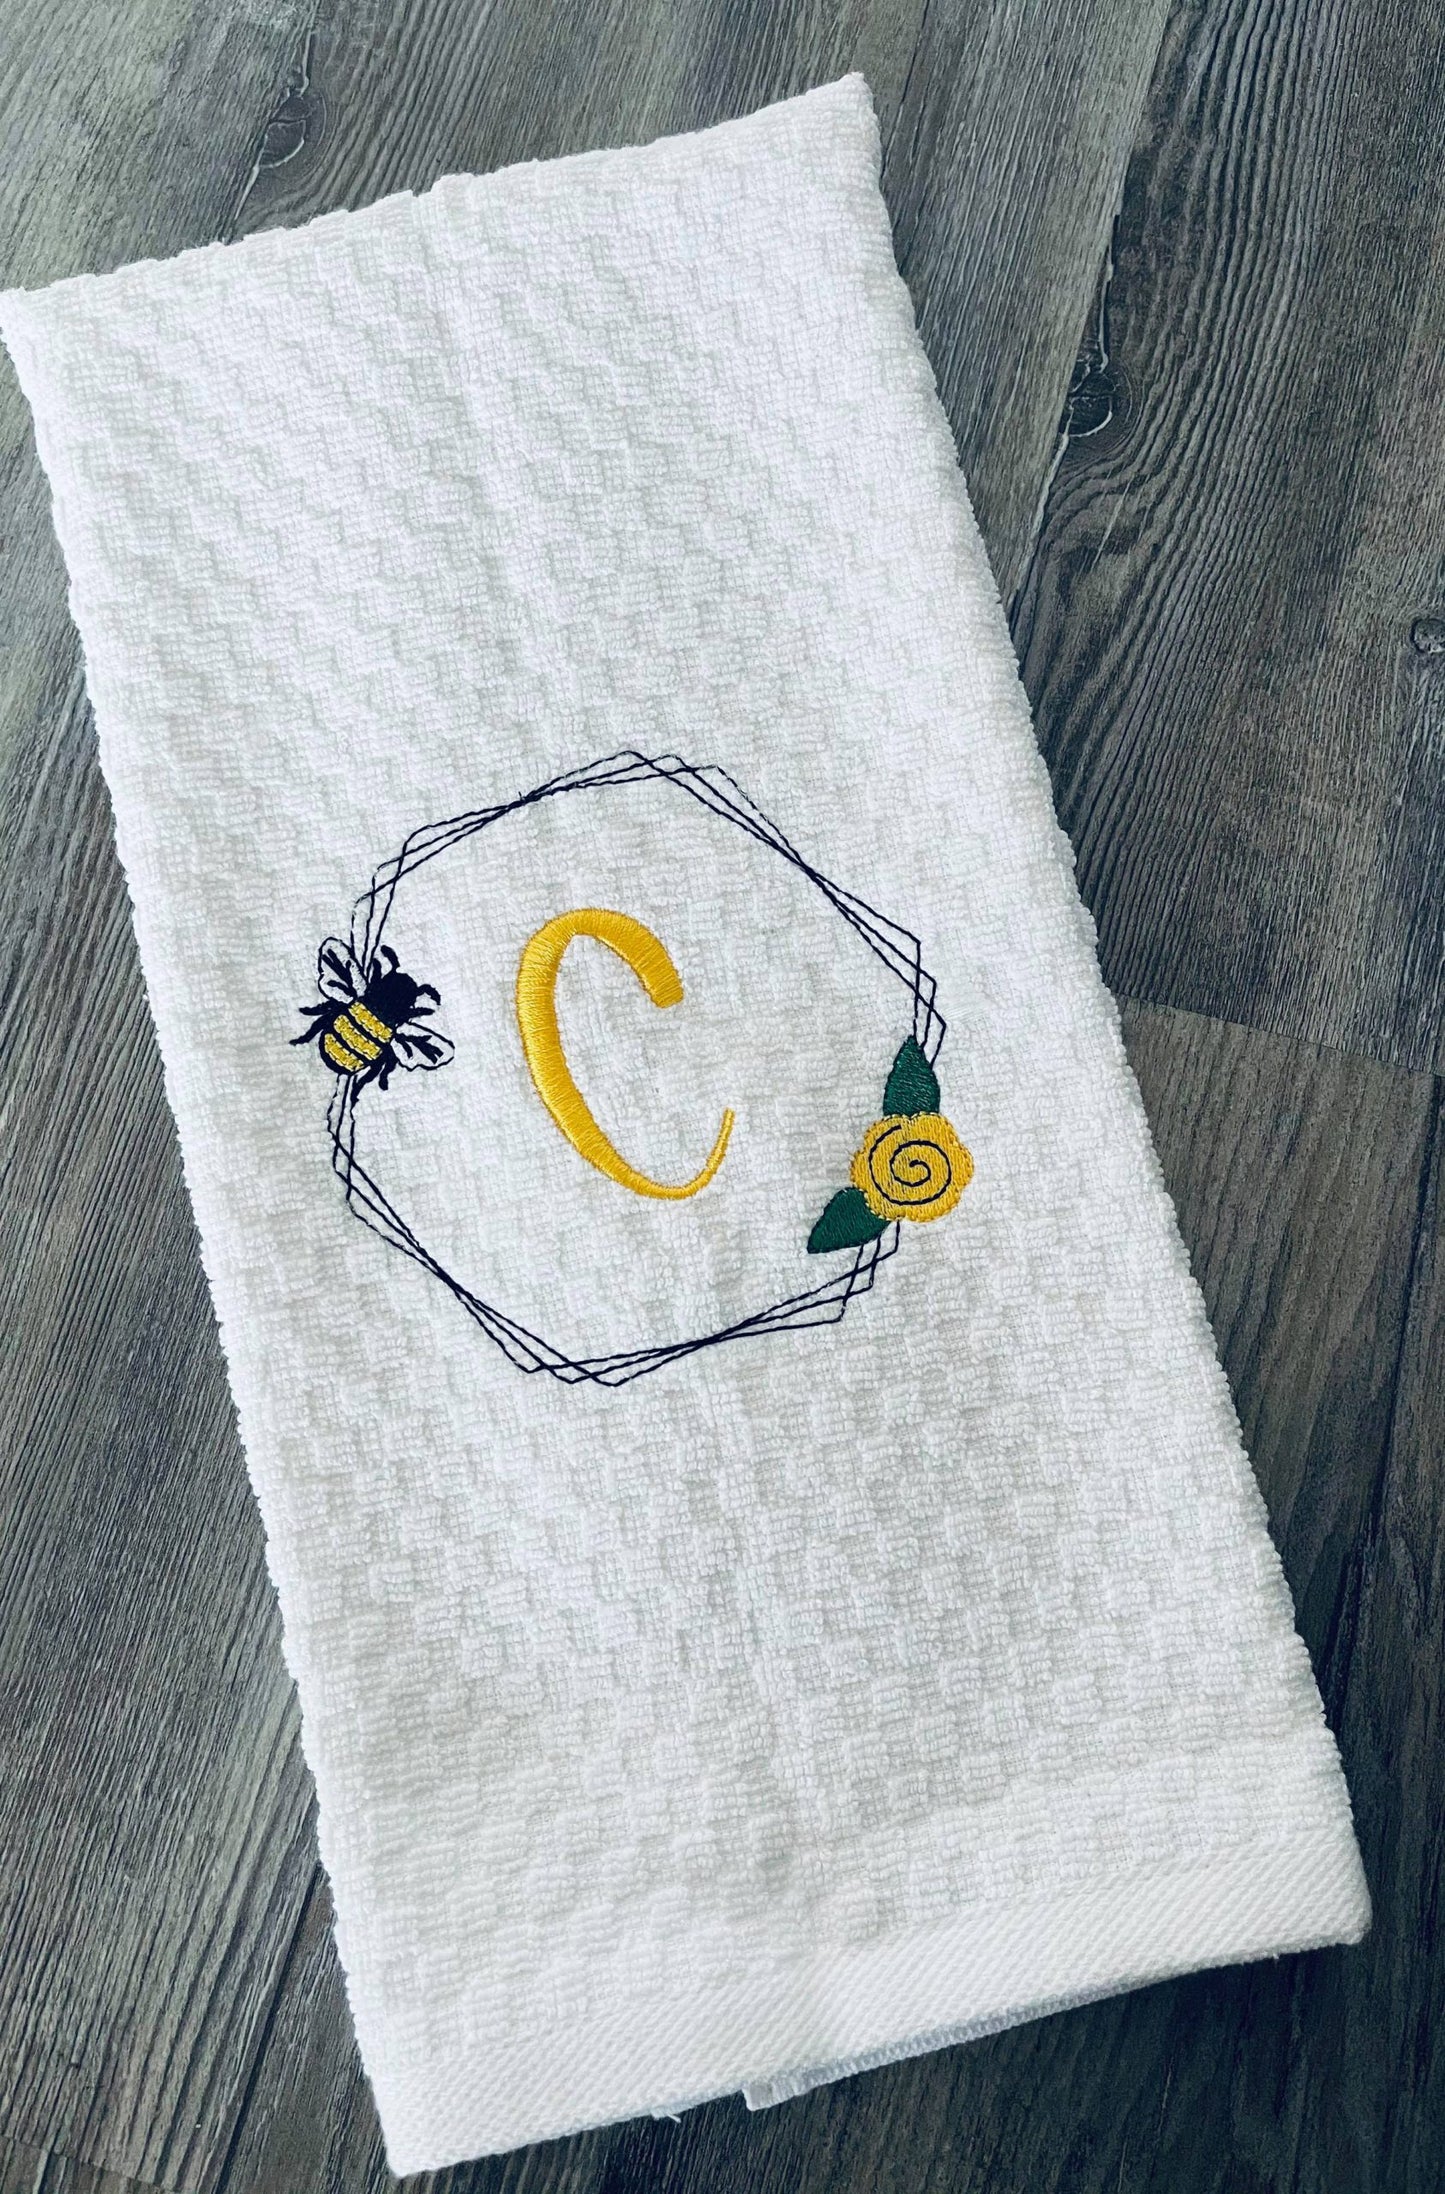 Bee Frame #3 - 4 sizes- Digital Embroidery Design